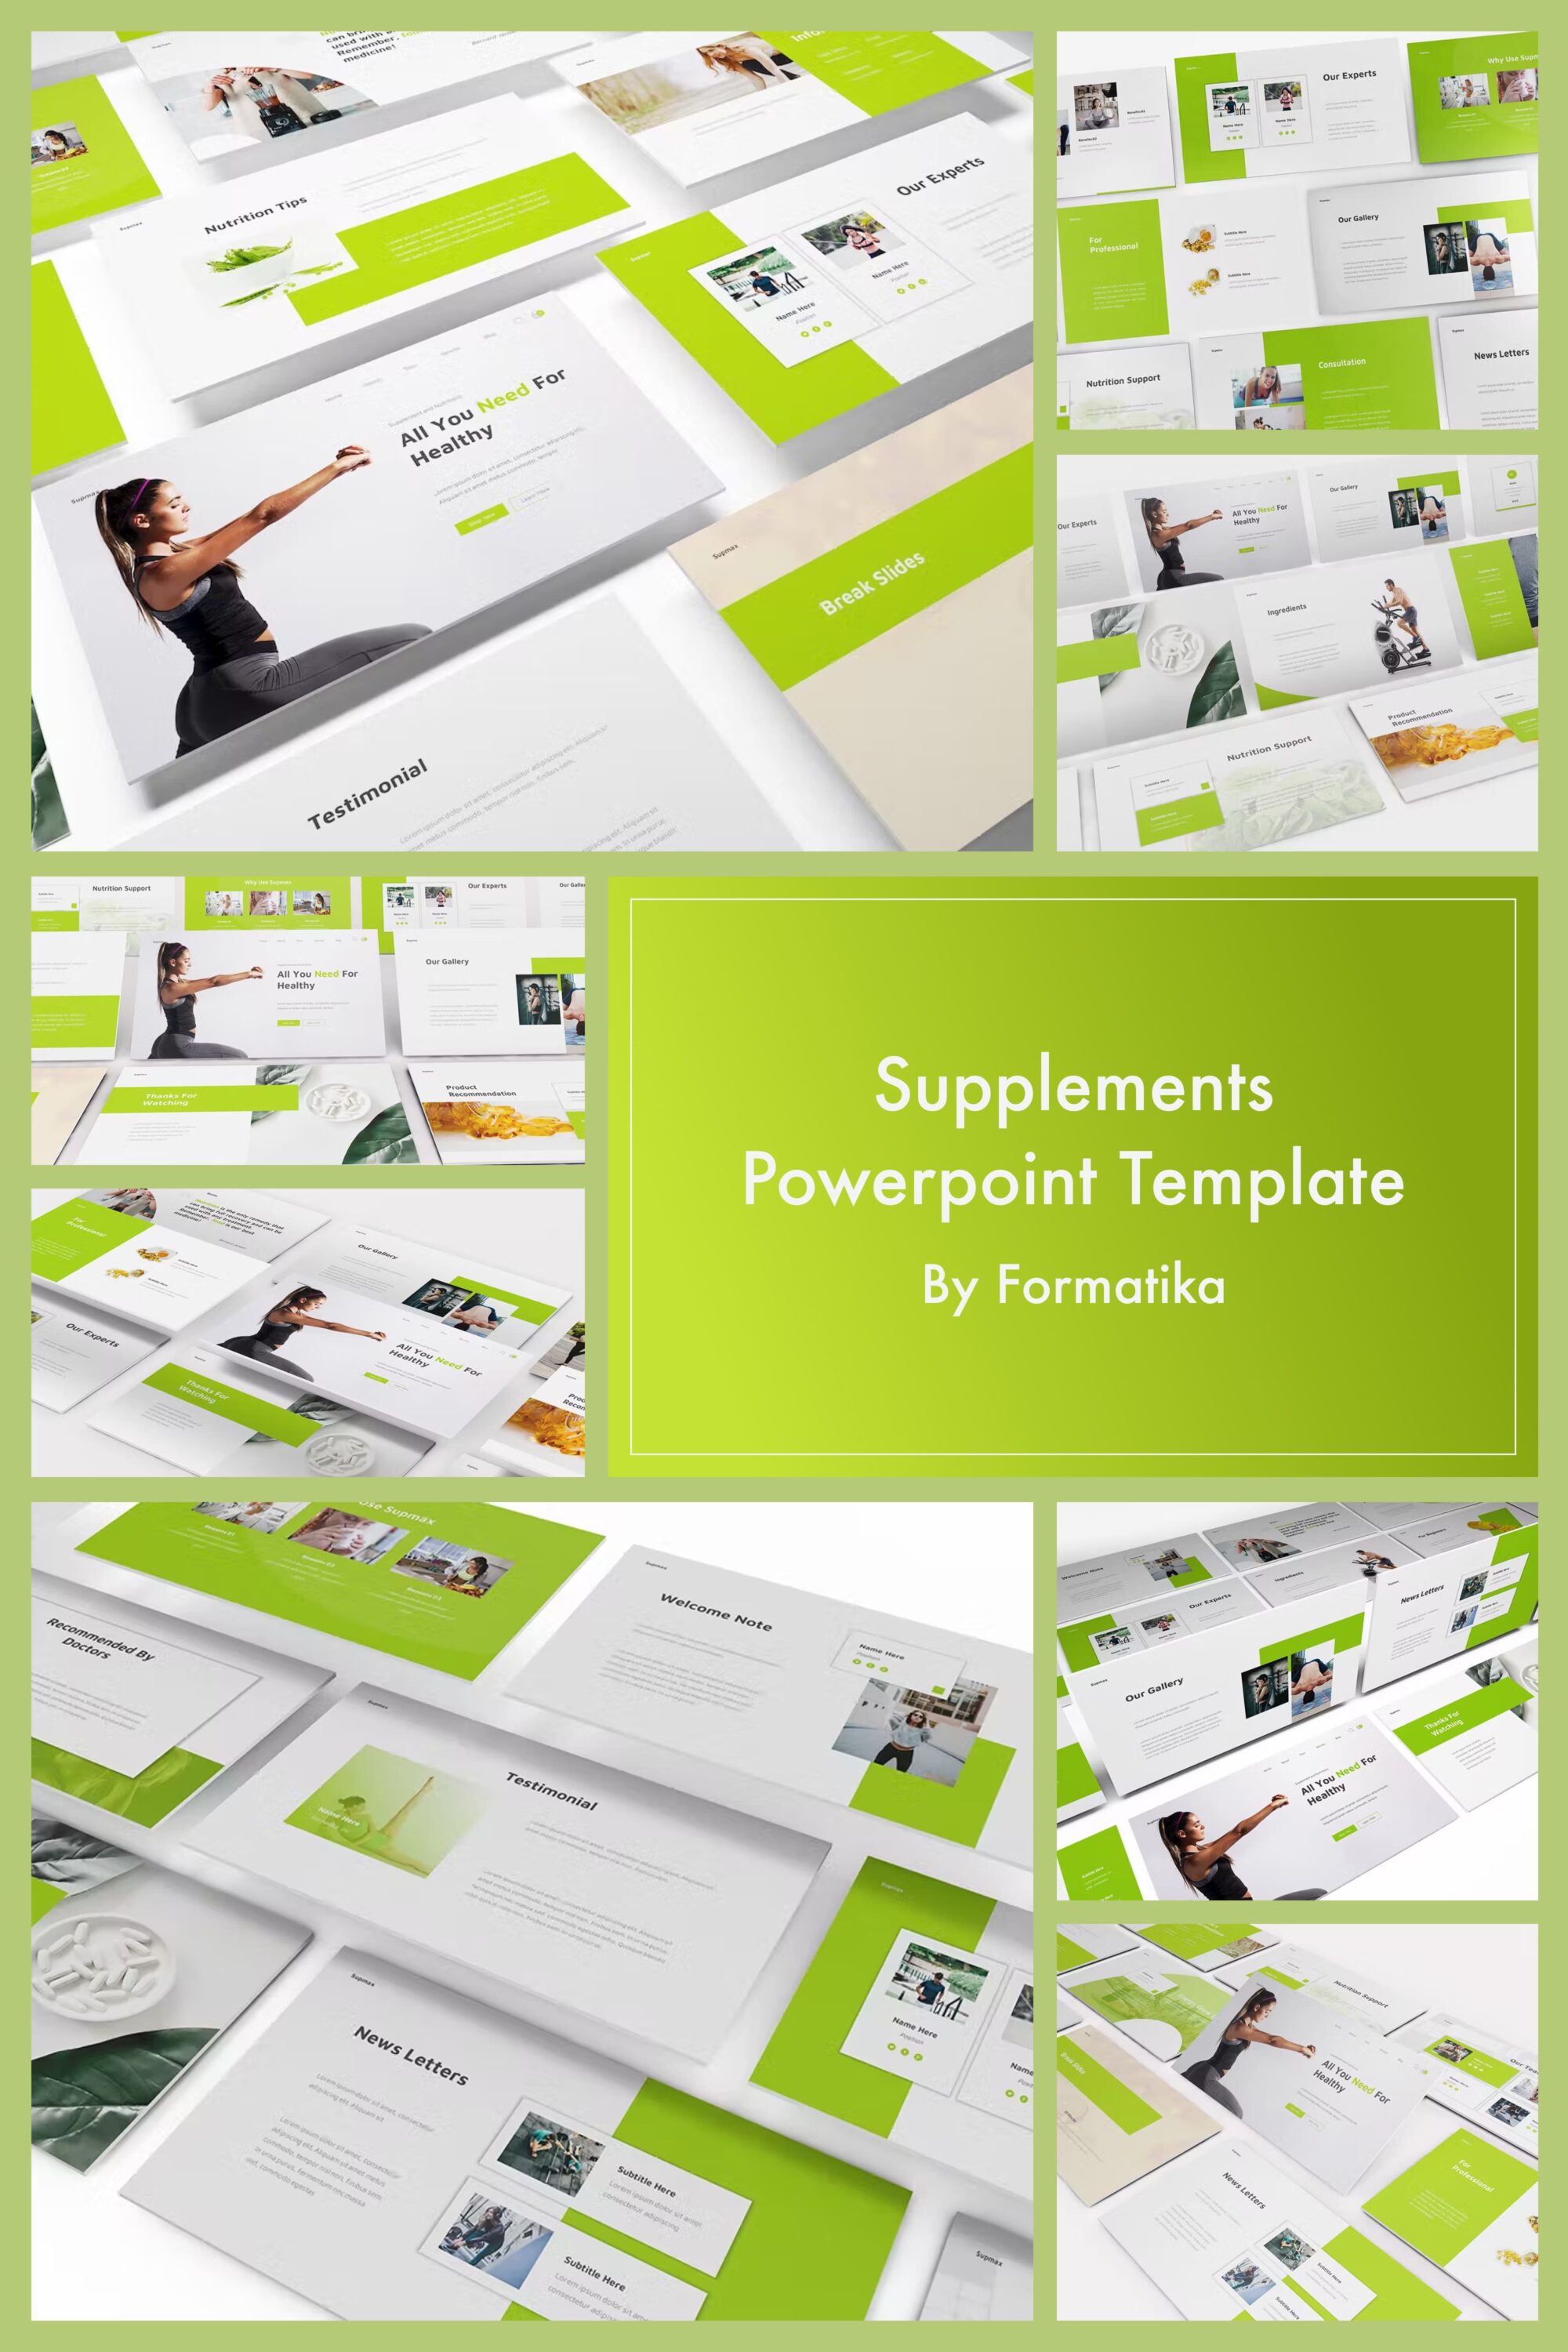 Supplements Powerpoint Template - pinterest image preview.